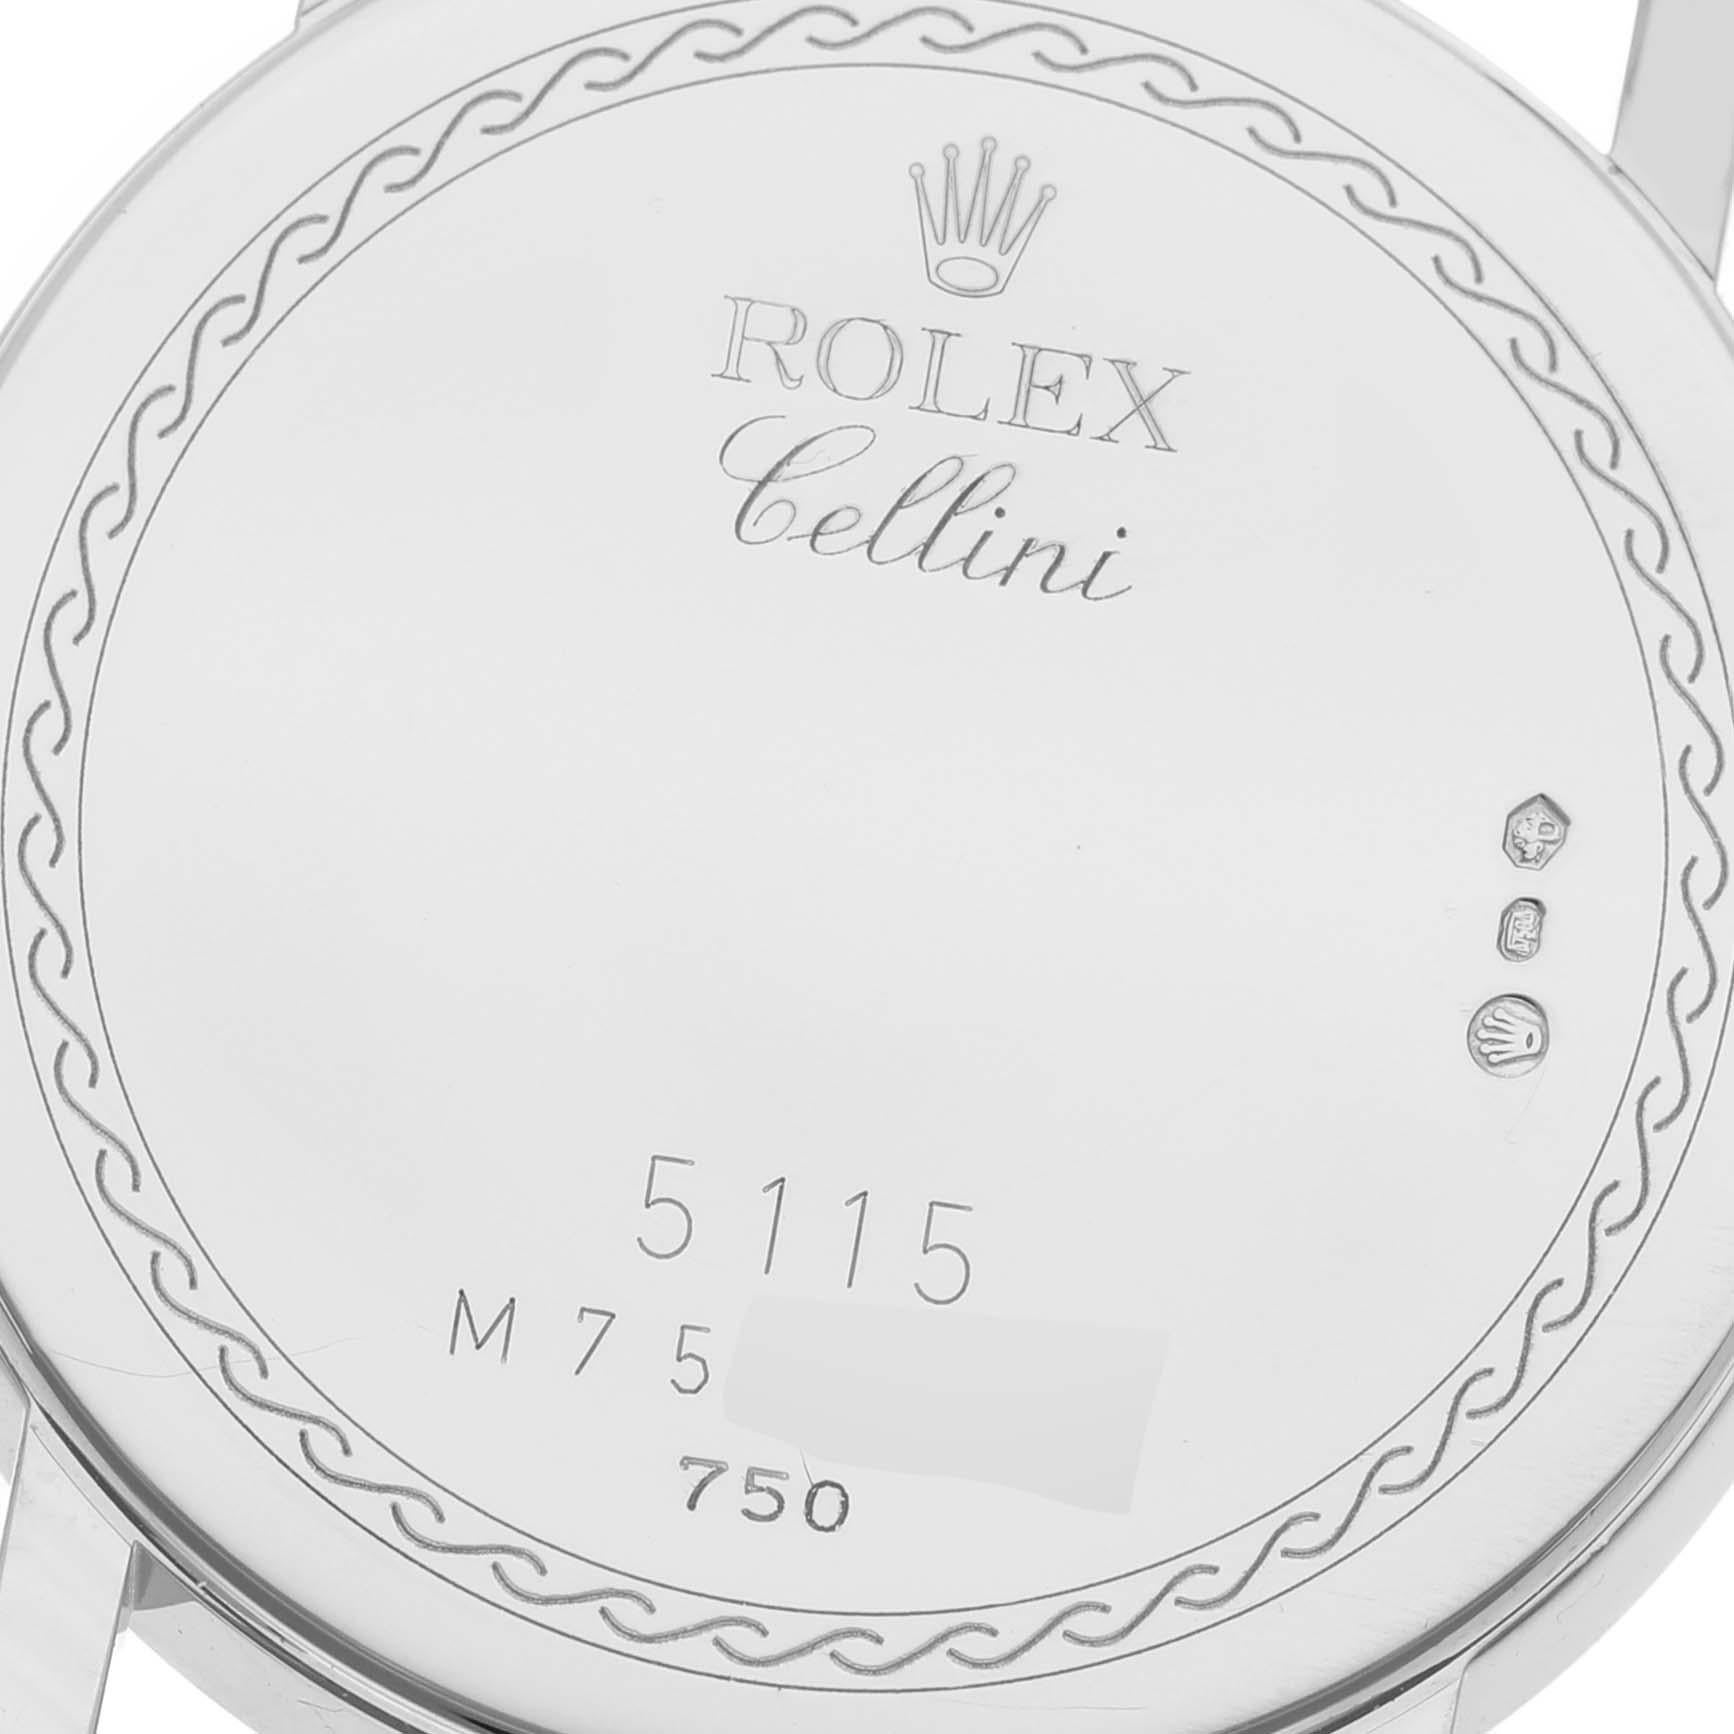 Rolex Cellini Classic White Gold Decorated Silver Dial Mens Watch 5115 Box Card For Sale 1